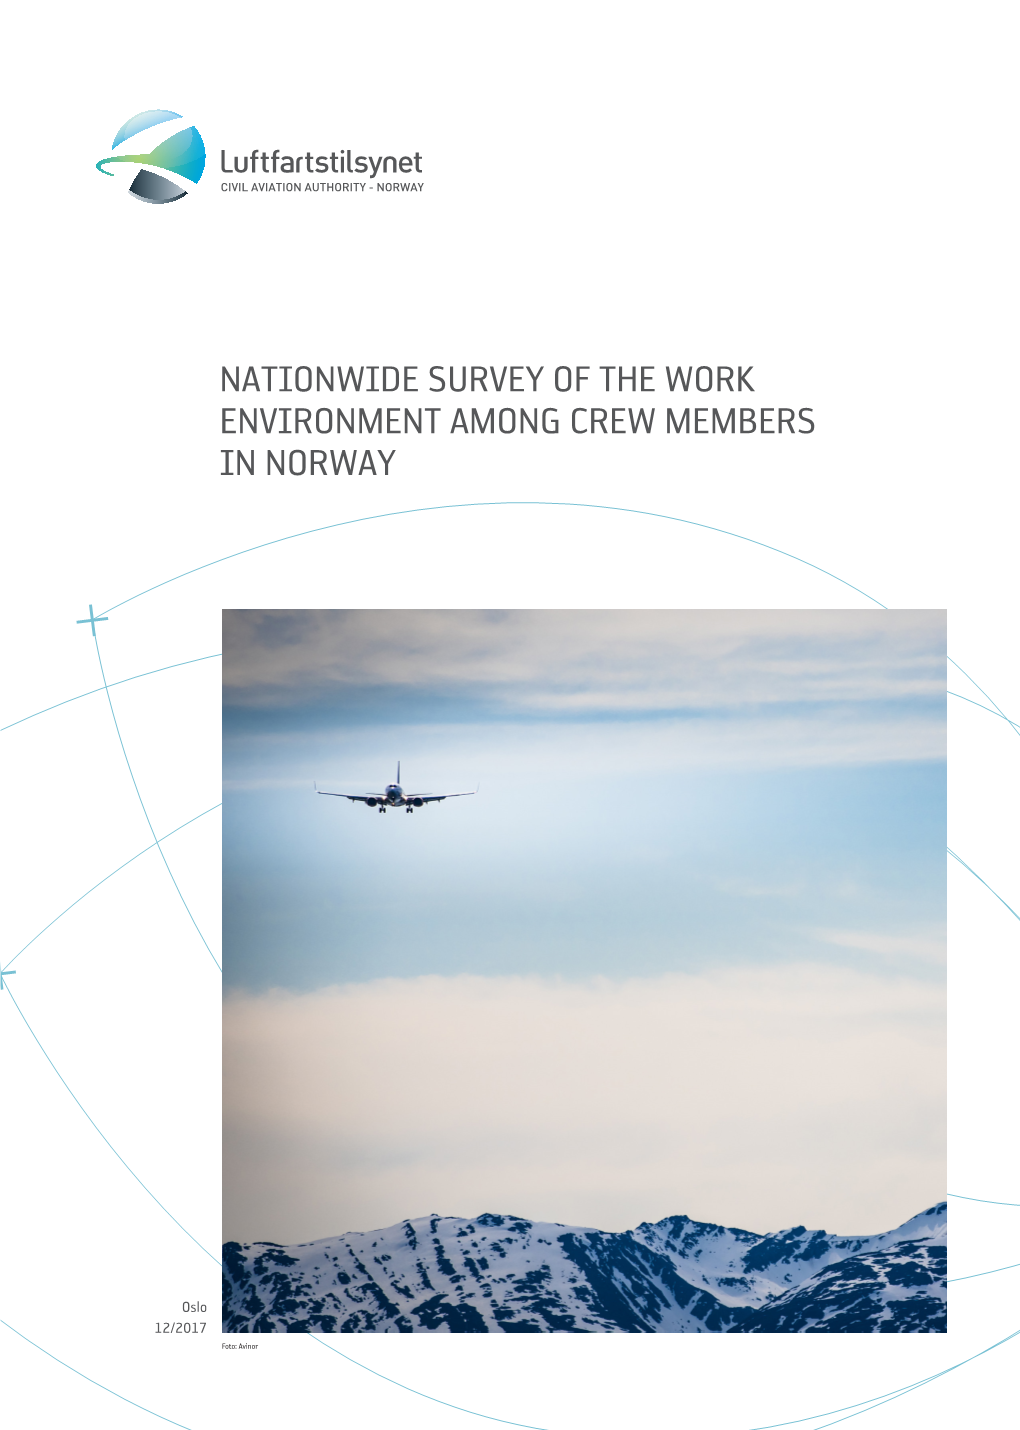 Nationwide Survey of the Work Environment Among Crew Members in Norway